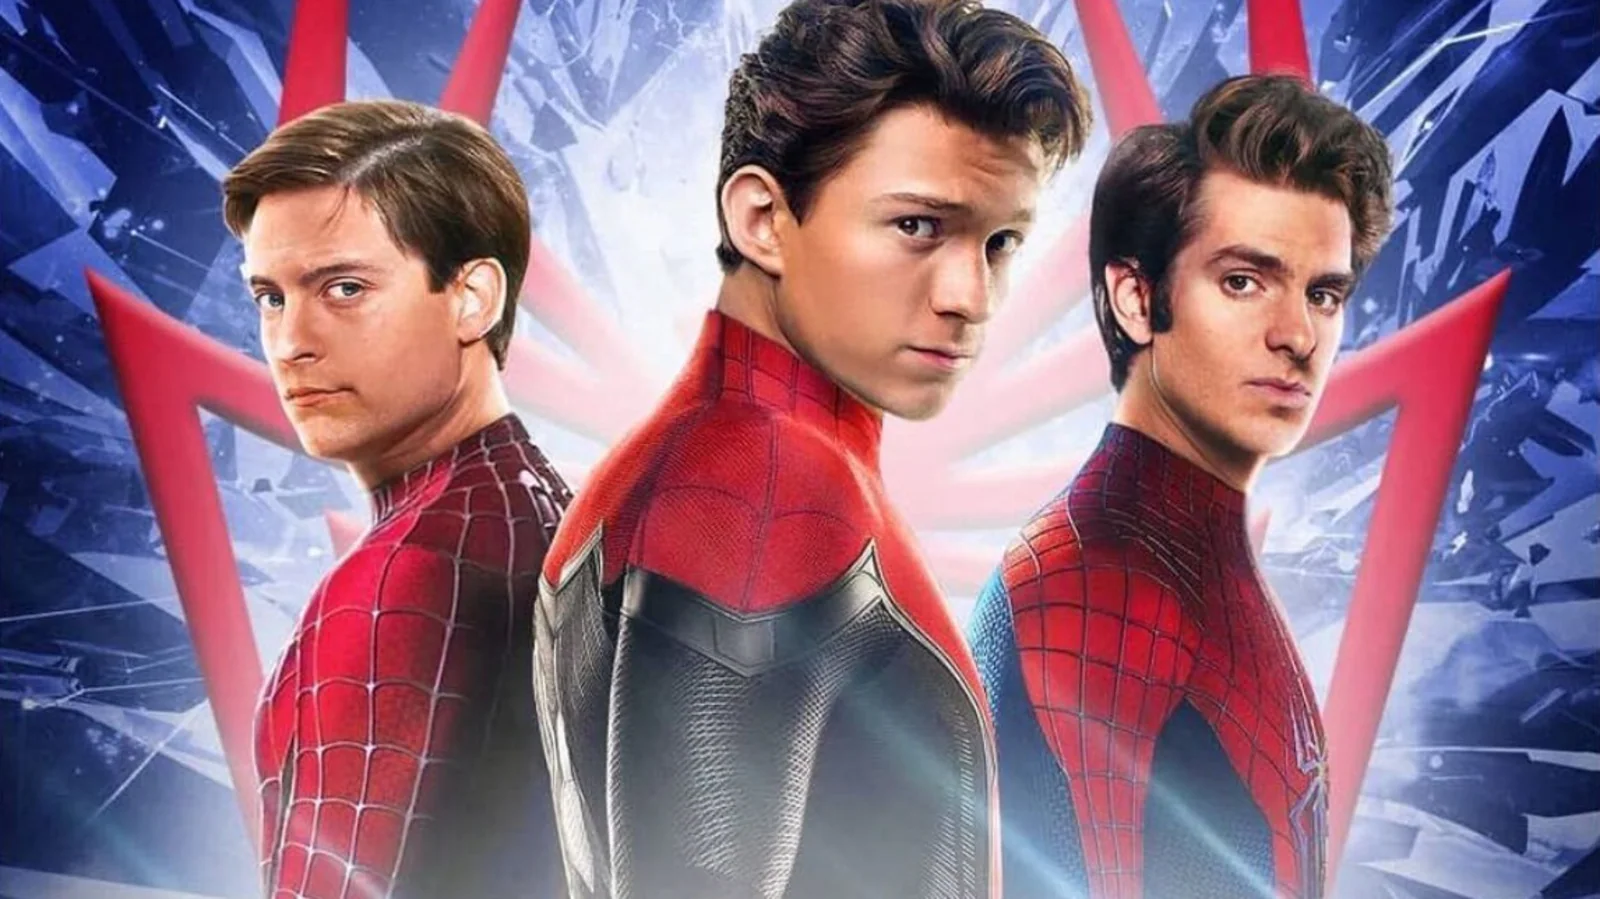 Andrew Garfield Talks About The Brotherhood Among The 3 Spider-Men